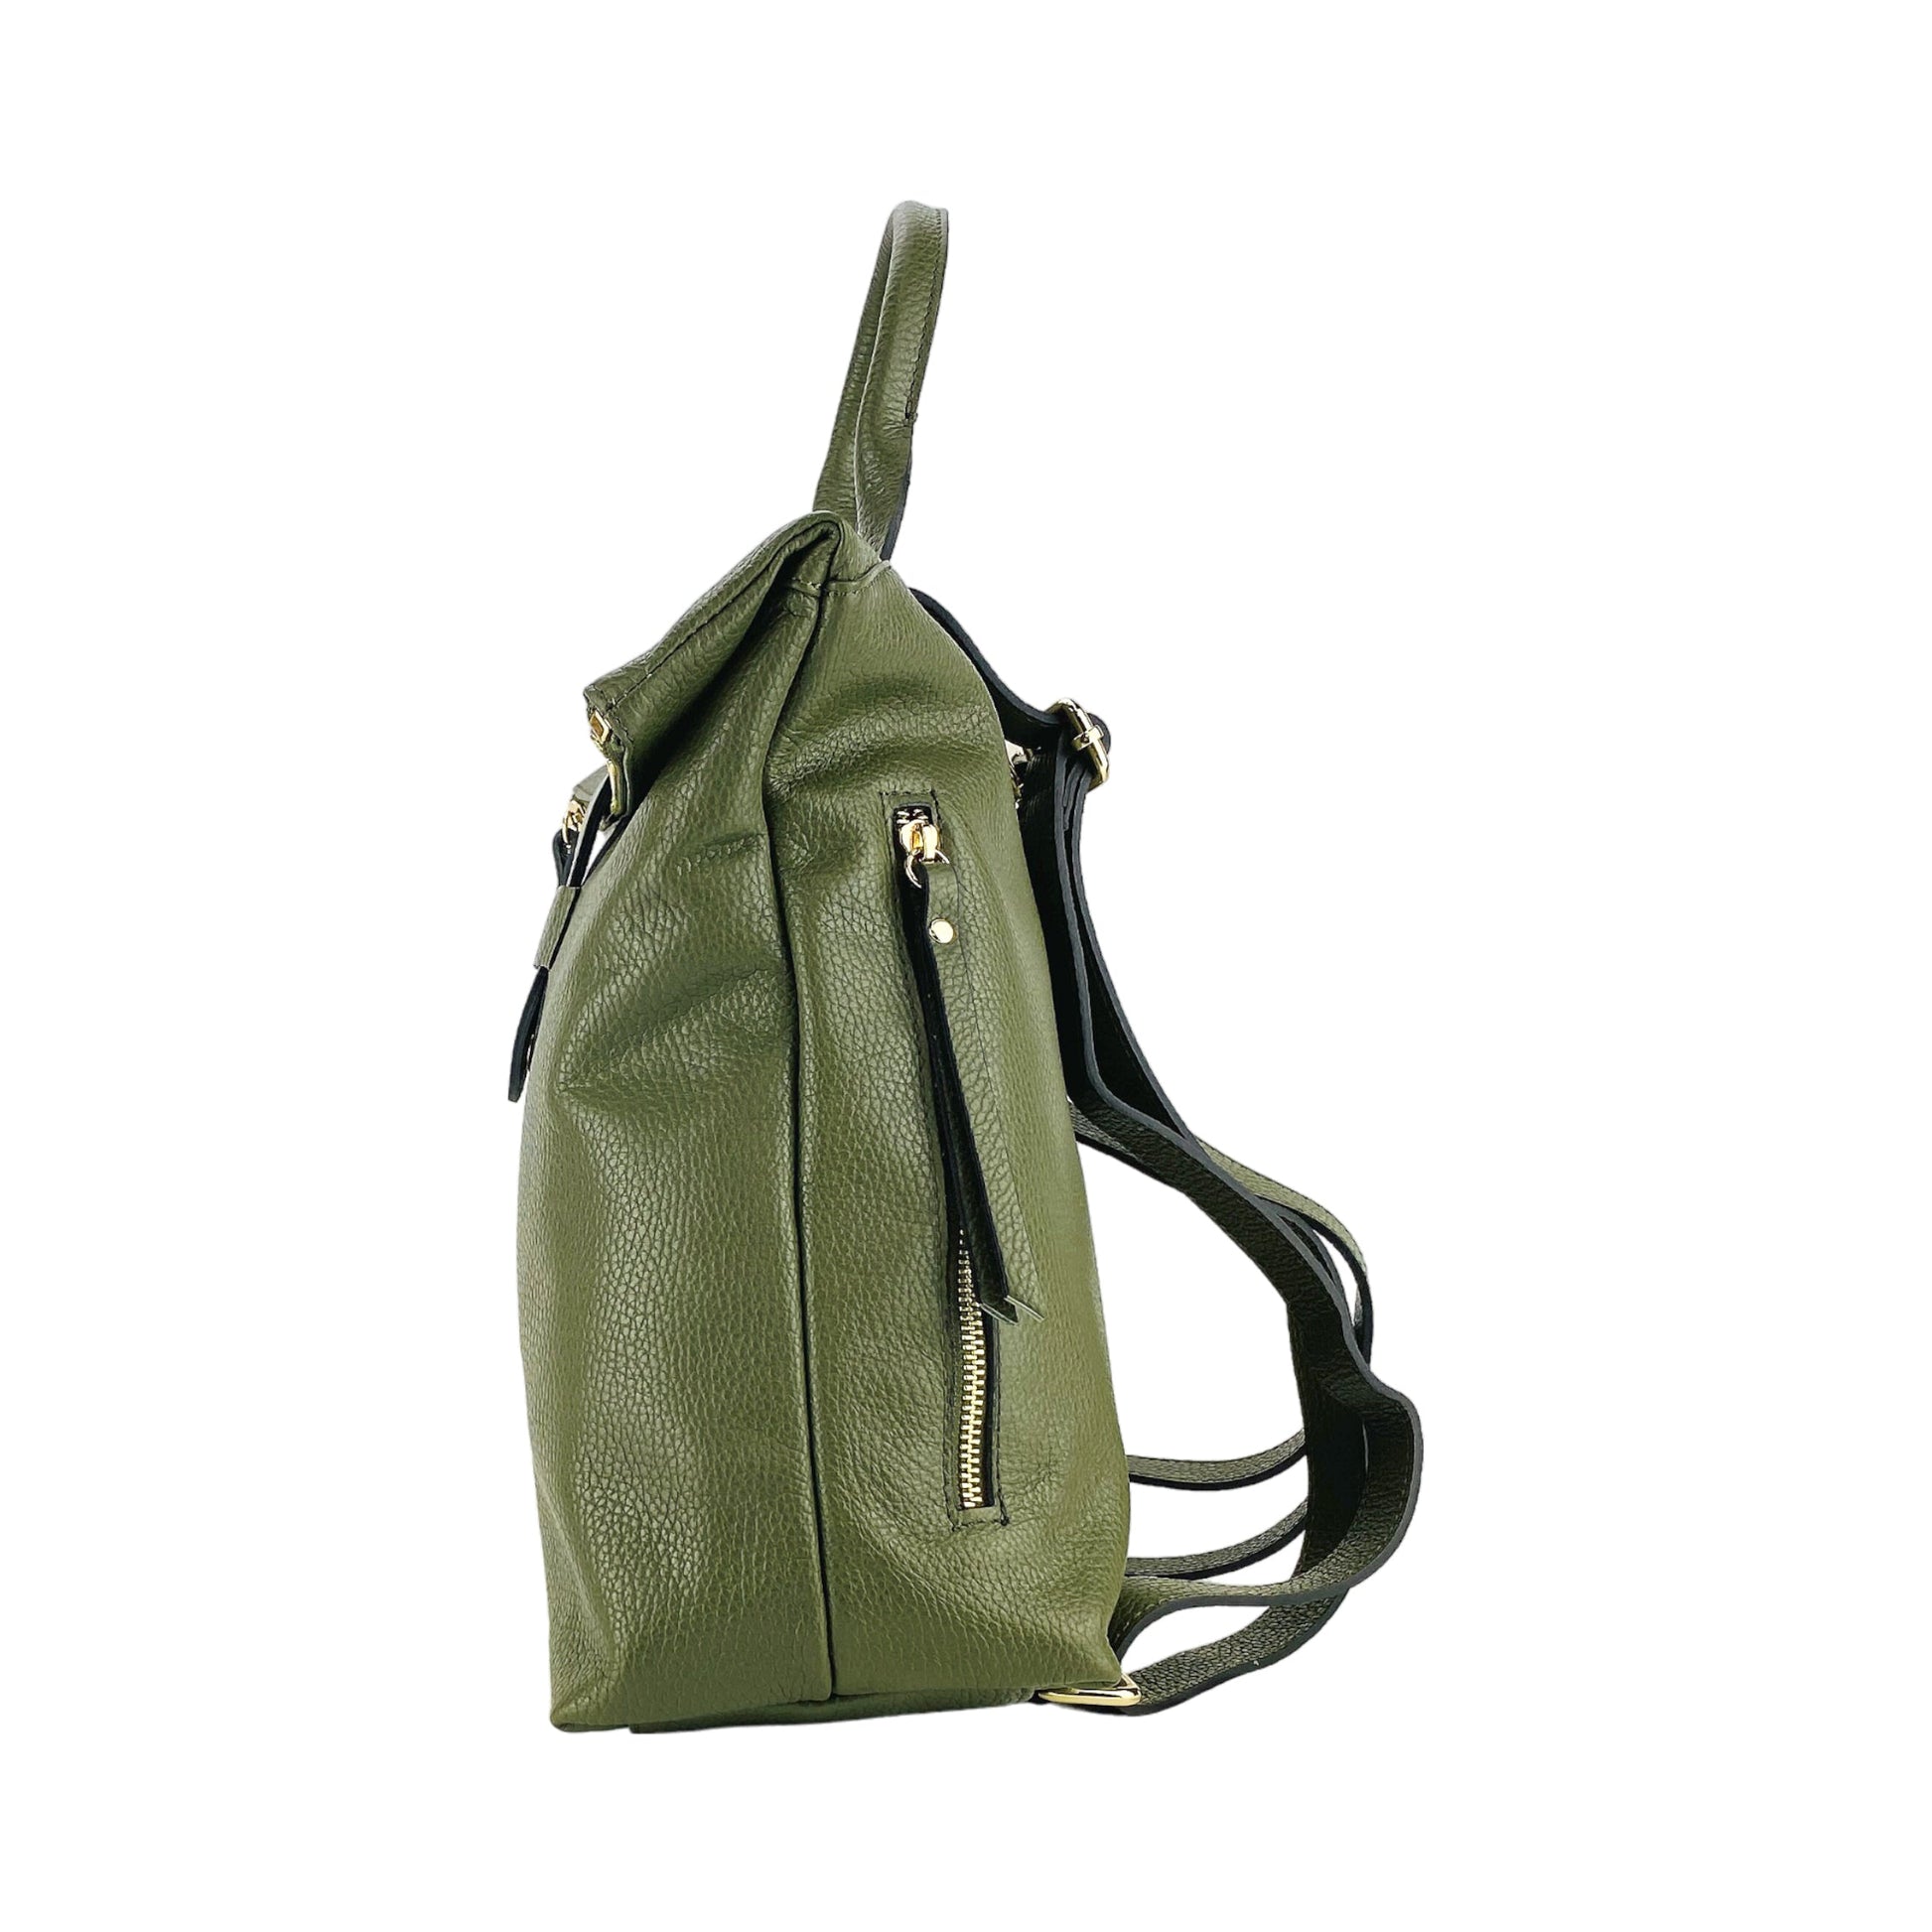 RB1021E | Soft women's backpack in genuine leather Made in Italy with adjustable shoulder straps. Zipper and accessories in shiny gold metal - Green color - Dimensions: 30 x 34 x 10.5 cm-5